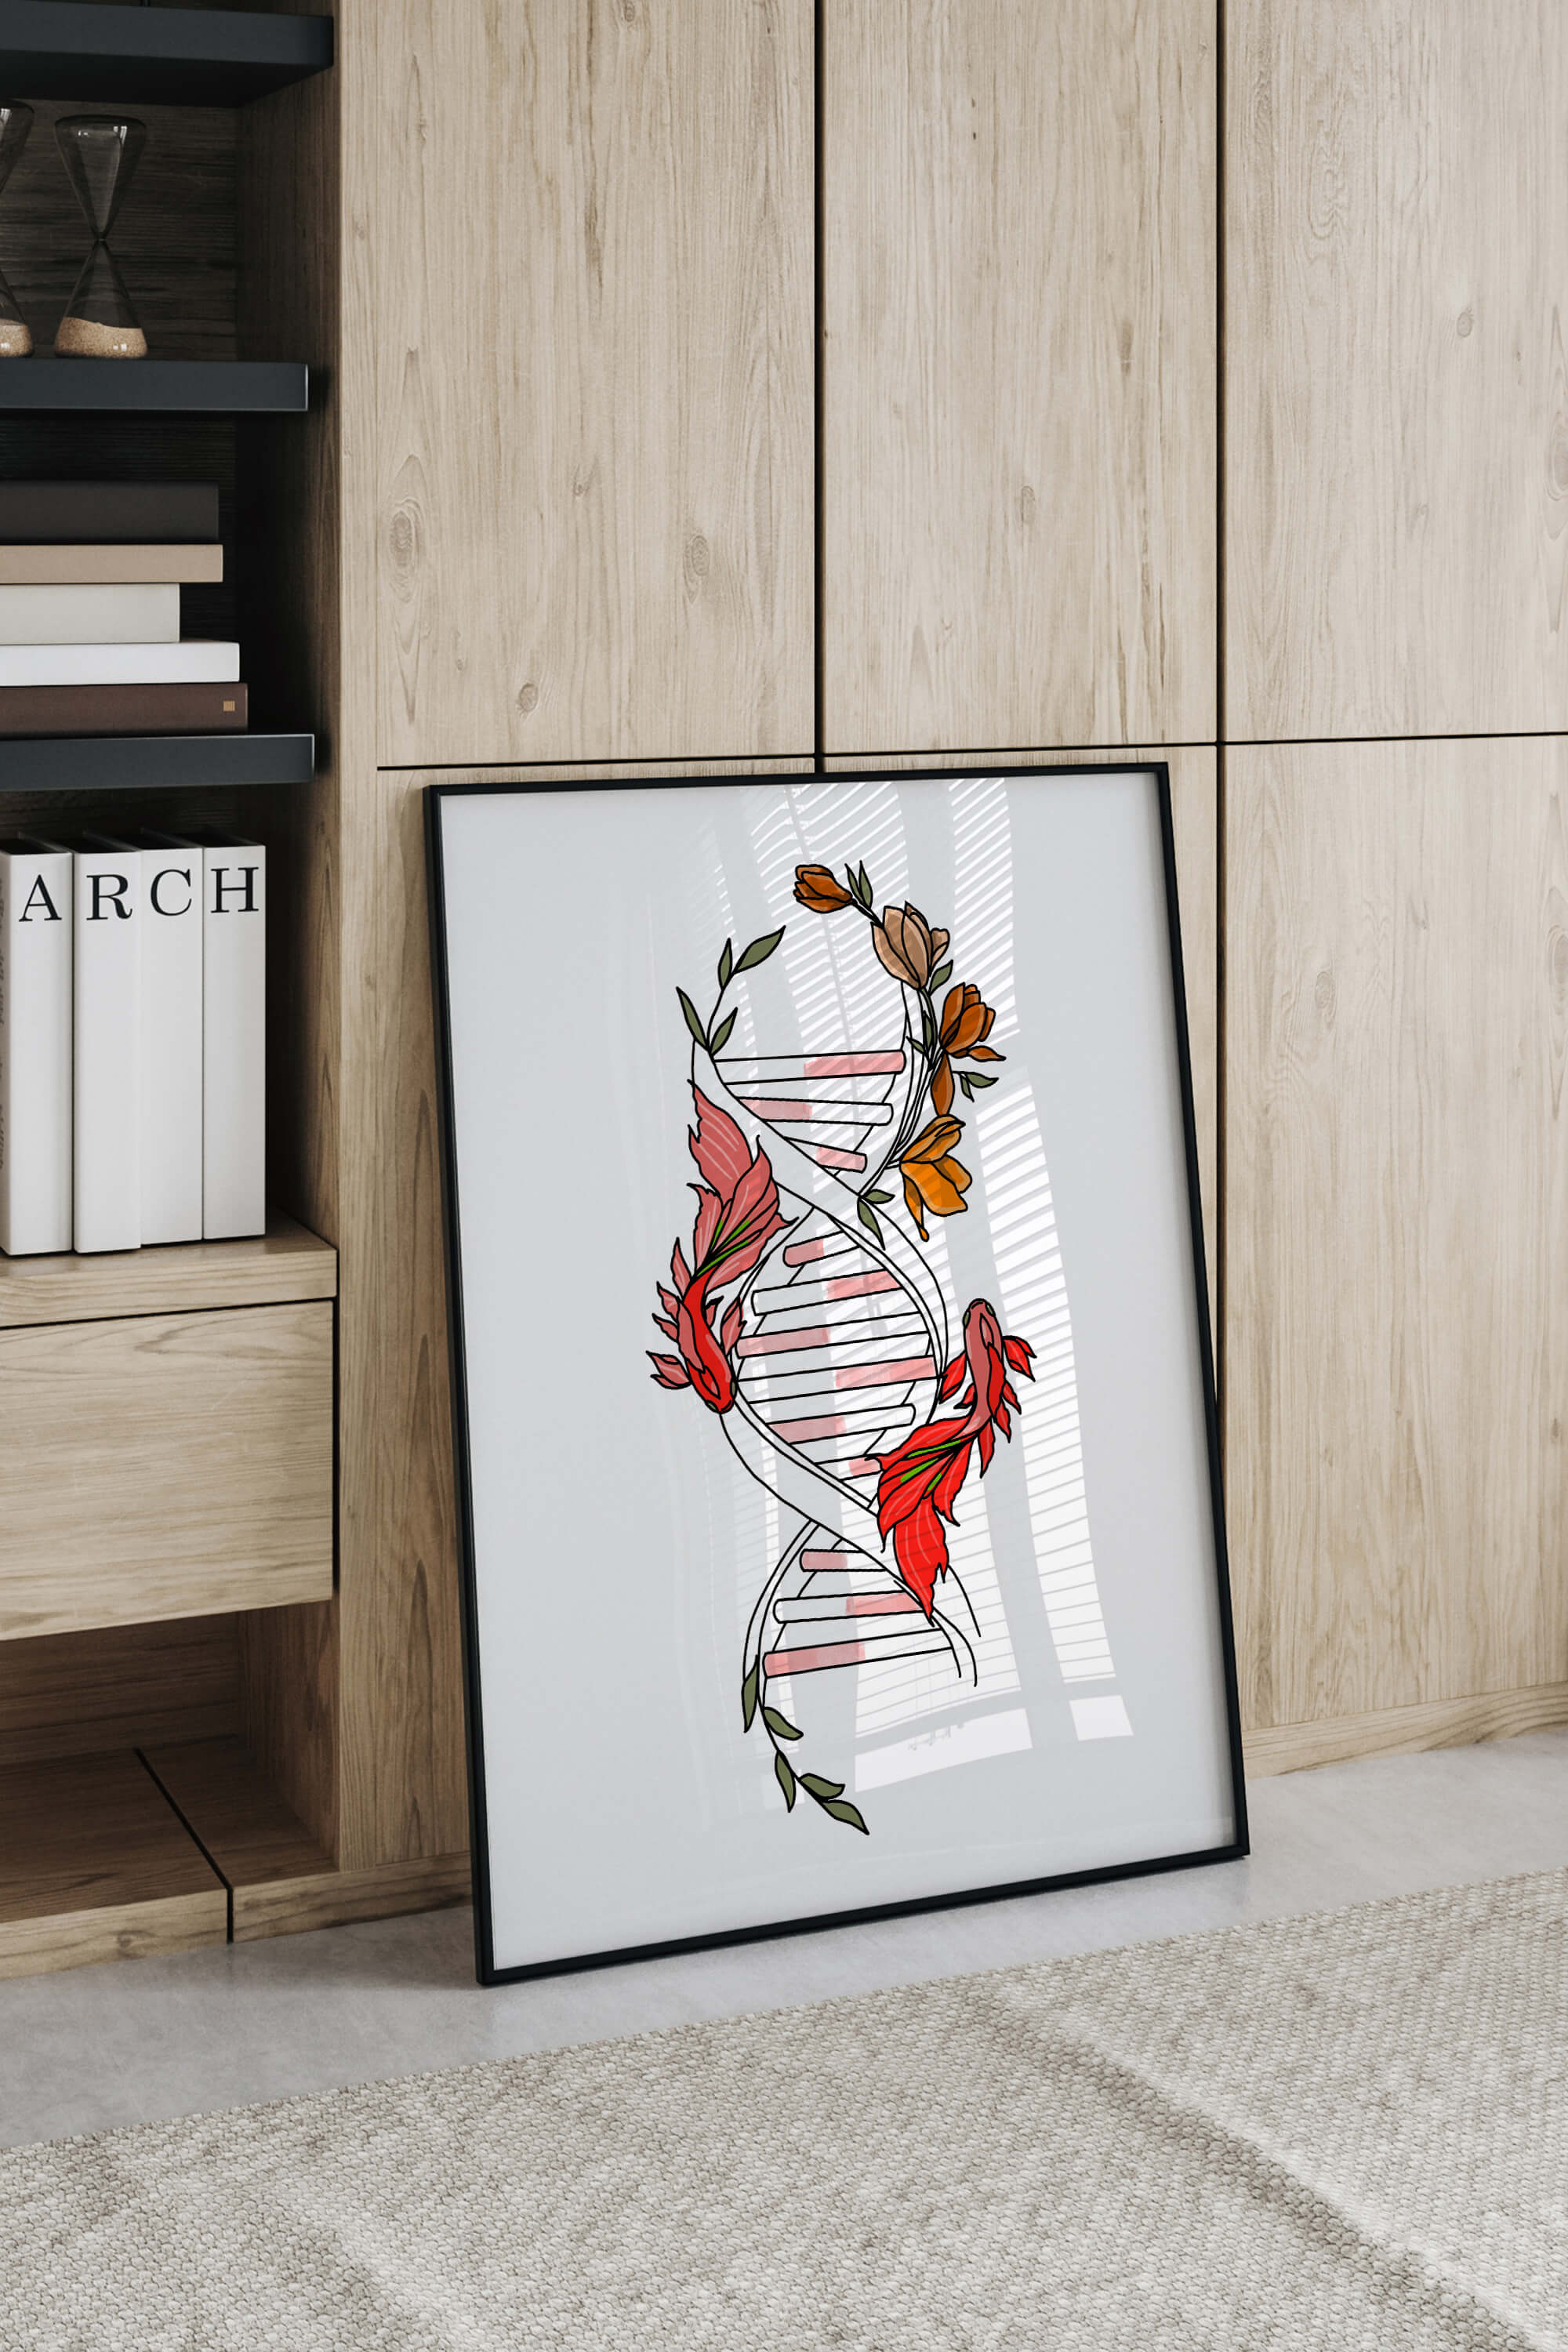 Colorful Floral DNA Art Print perfect for science teachers looking to add a creative touch to learning environments.